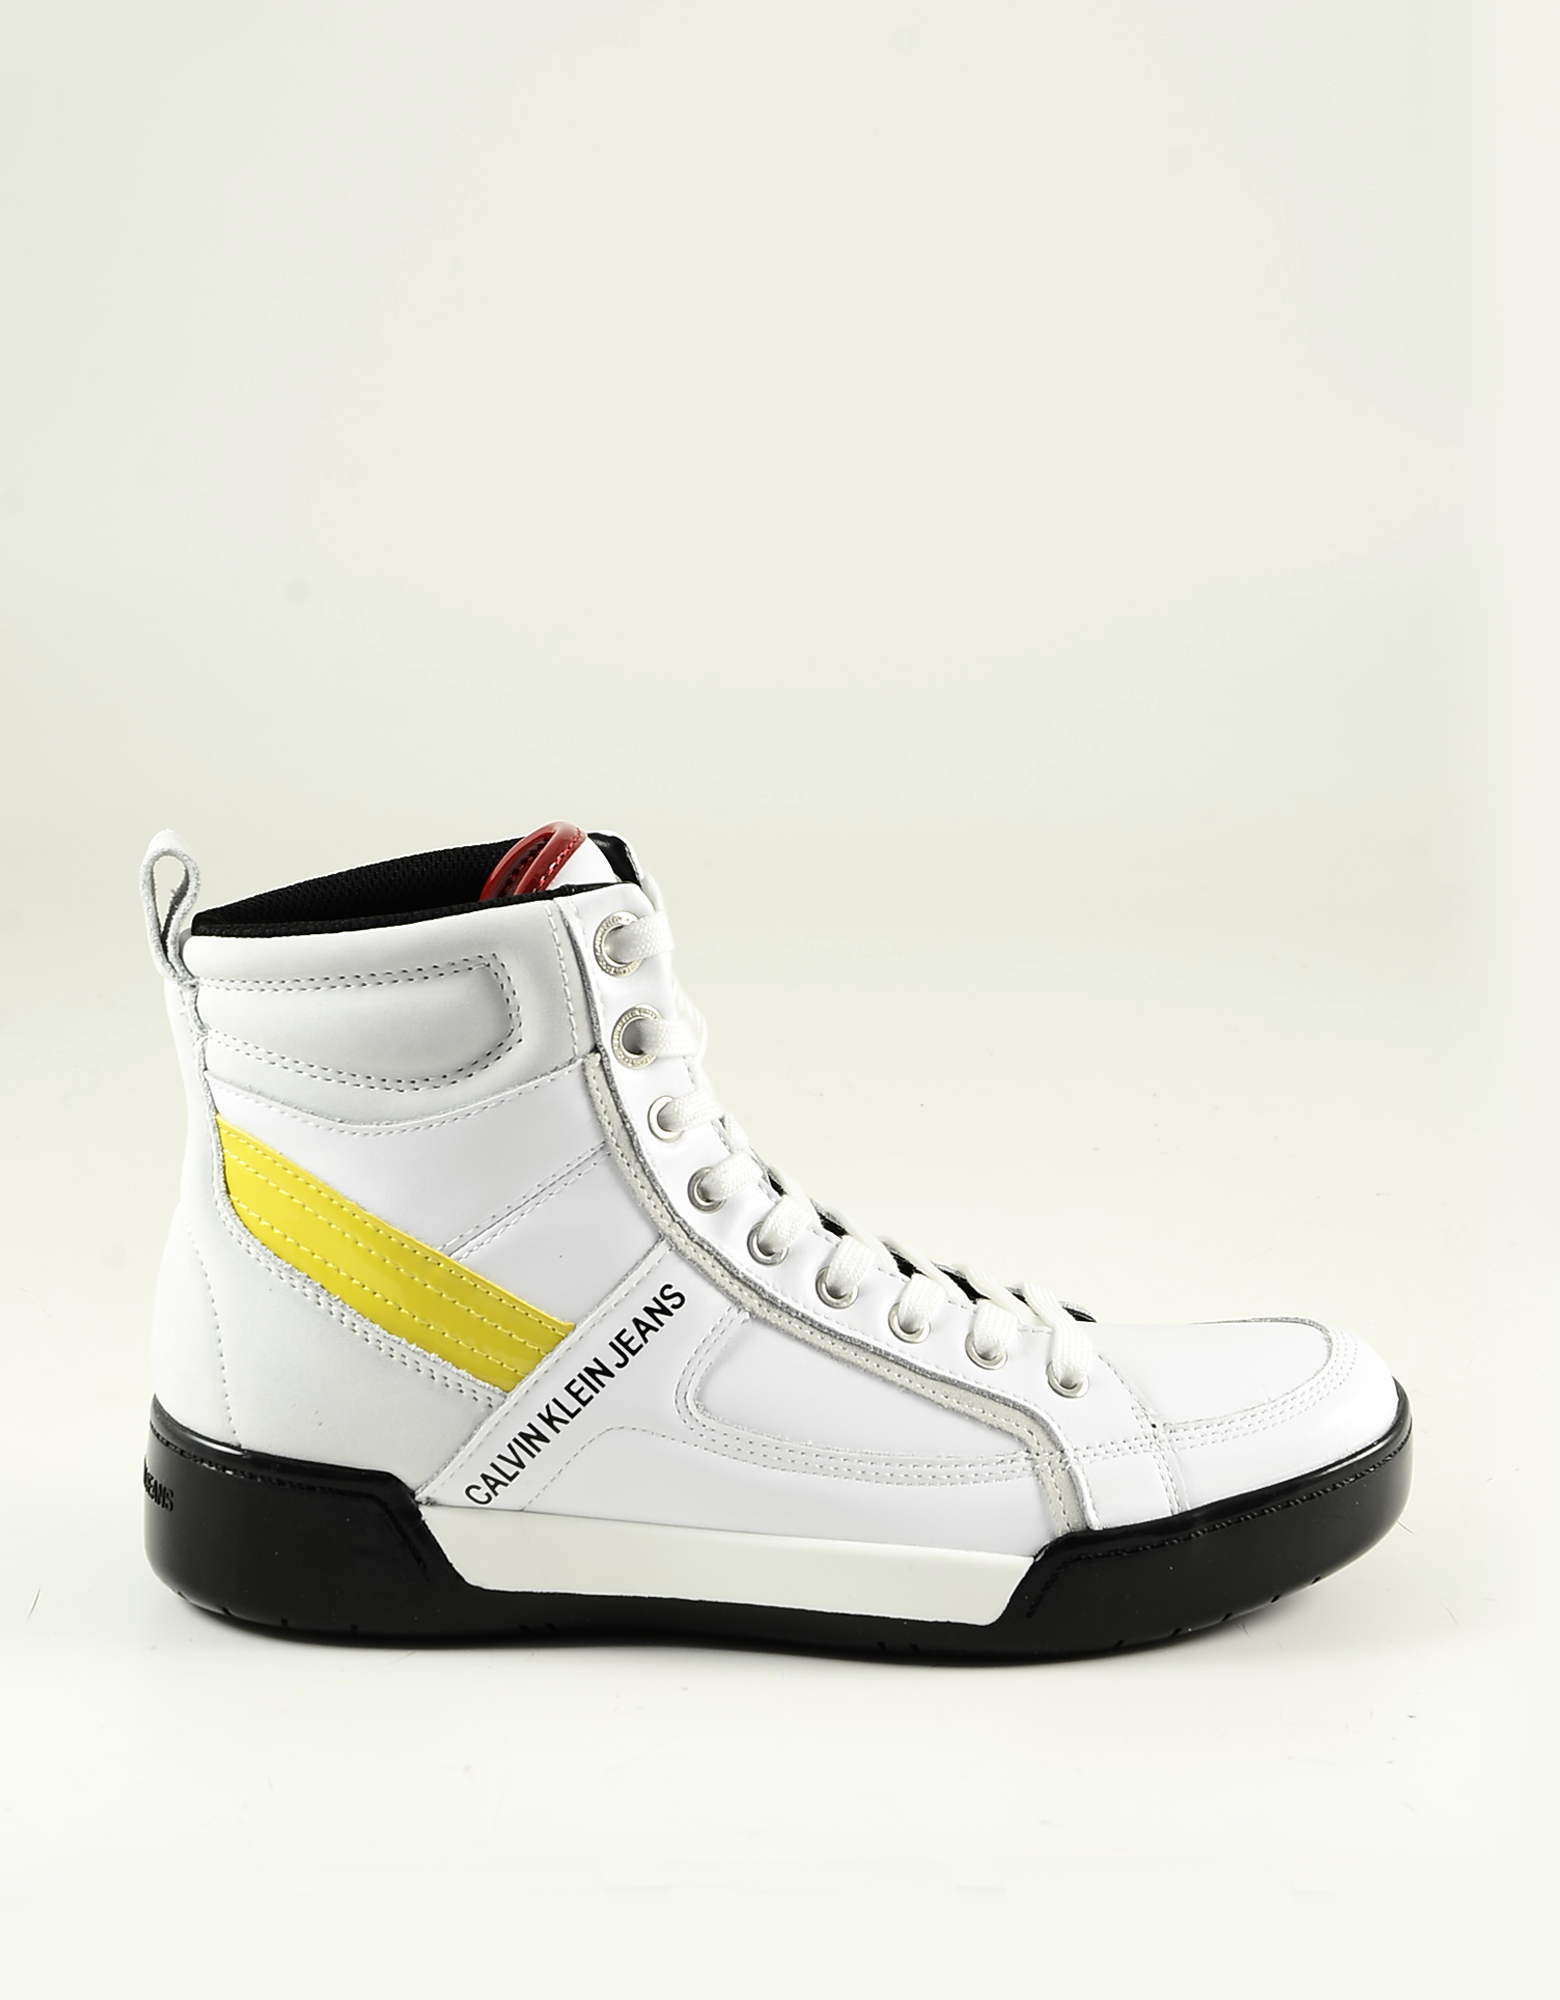 Klein Collection White Leather High-Top Men's Sneakers IT FORZIERI